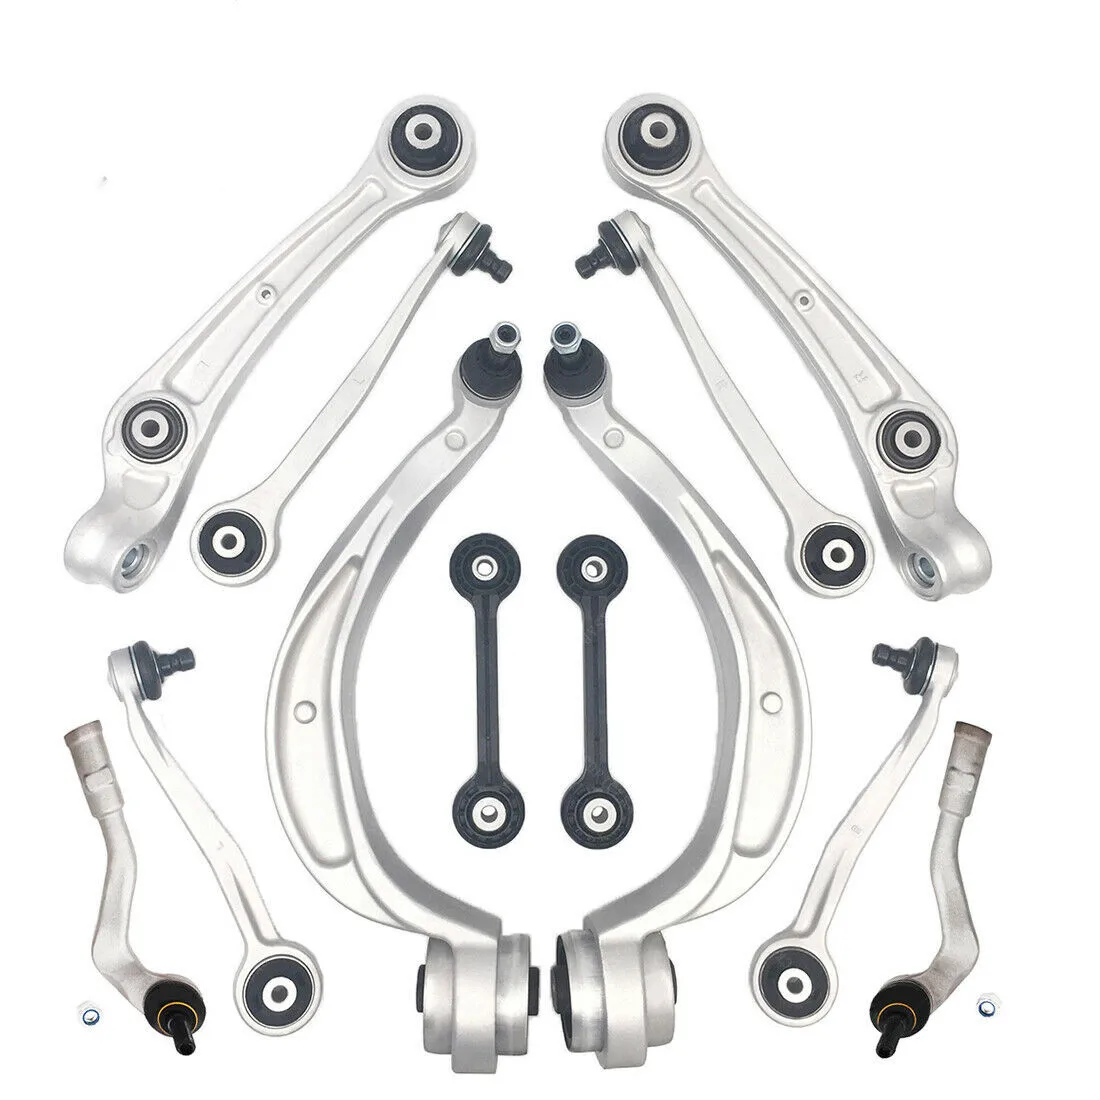 Suspension control arms wishbone set audi A4 B8 A5 8TA 8T3 Q5 8R front Rear 14pcs with 12mm ball joint